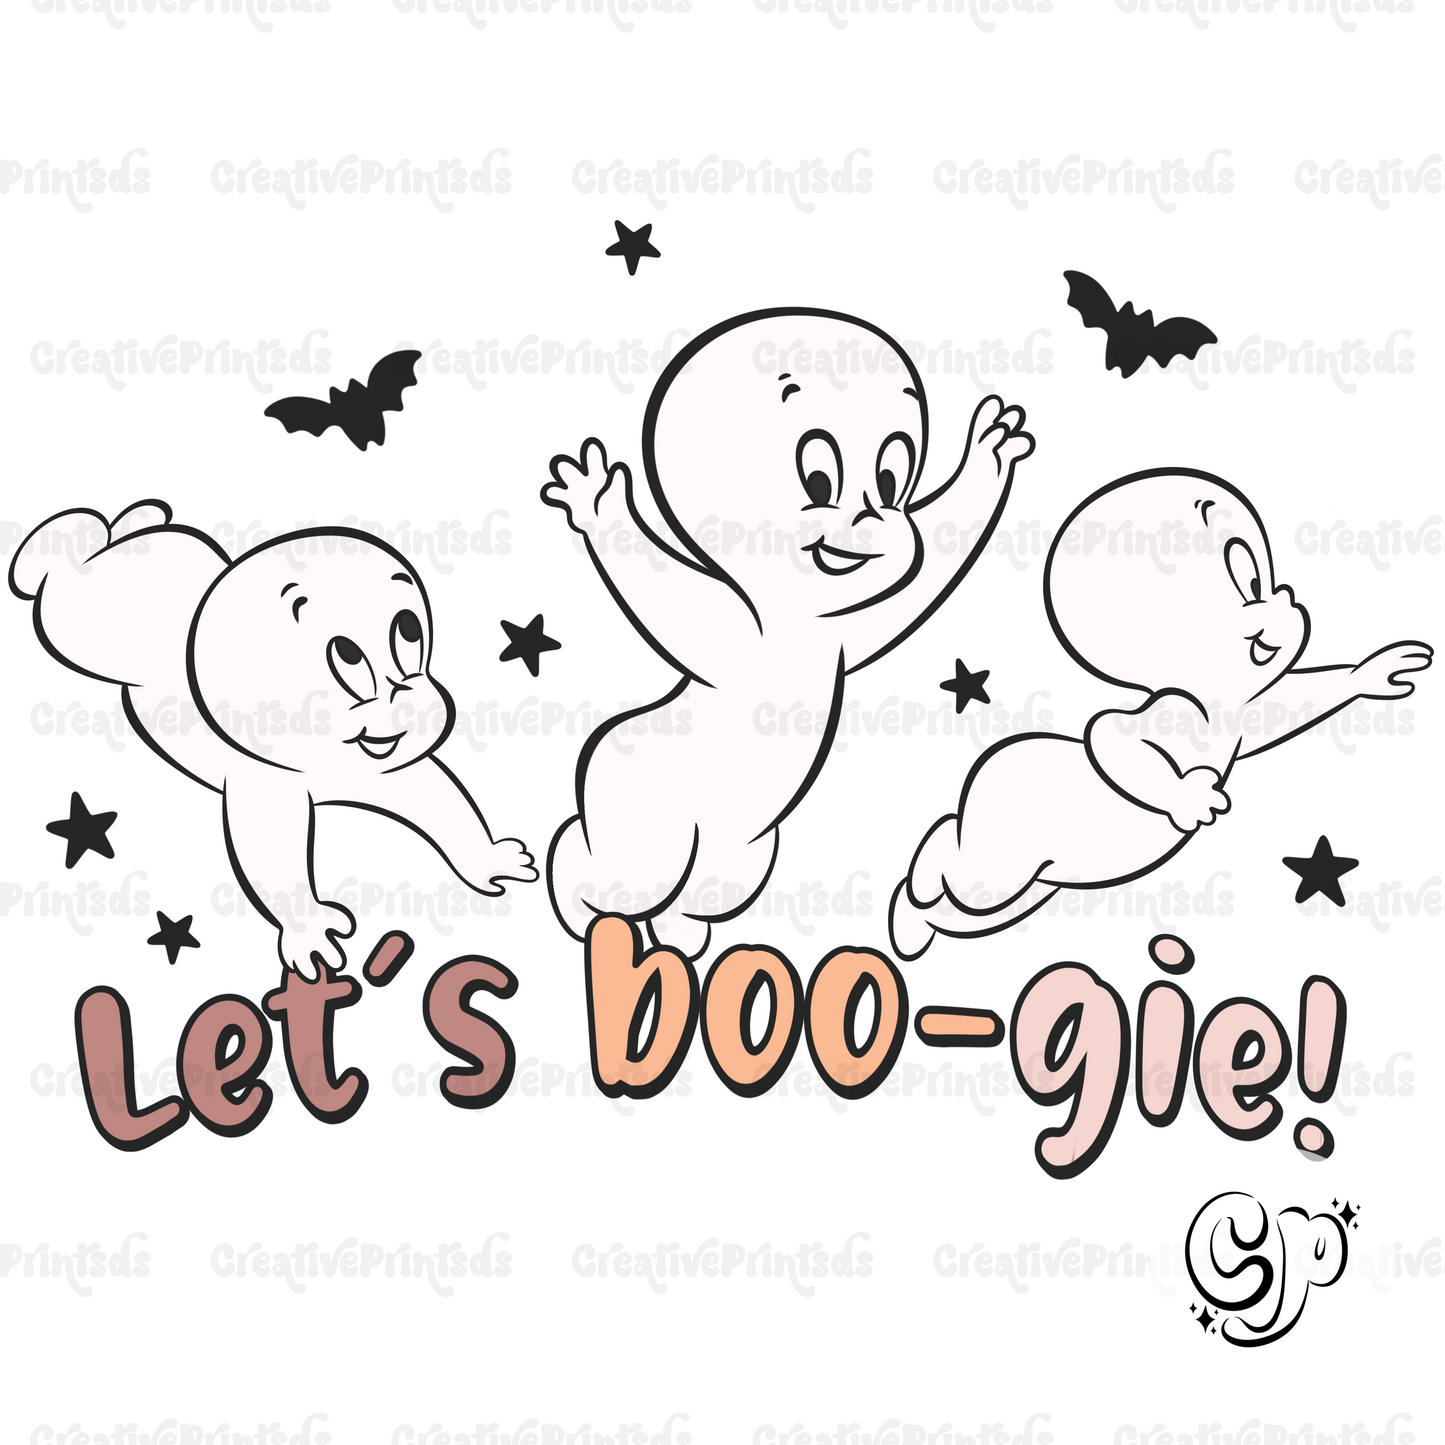 Let’s Boo-gie PNG